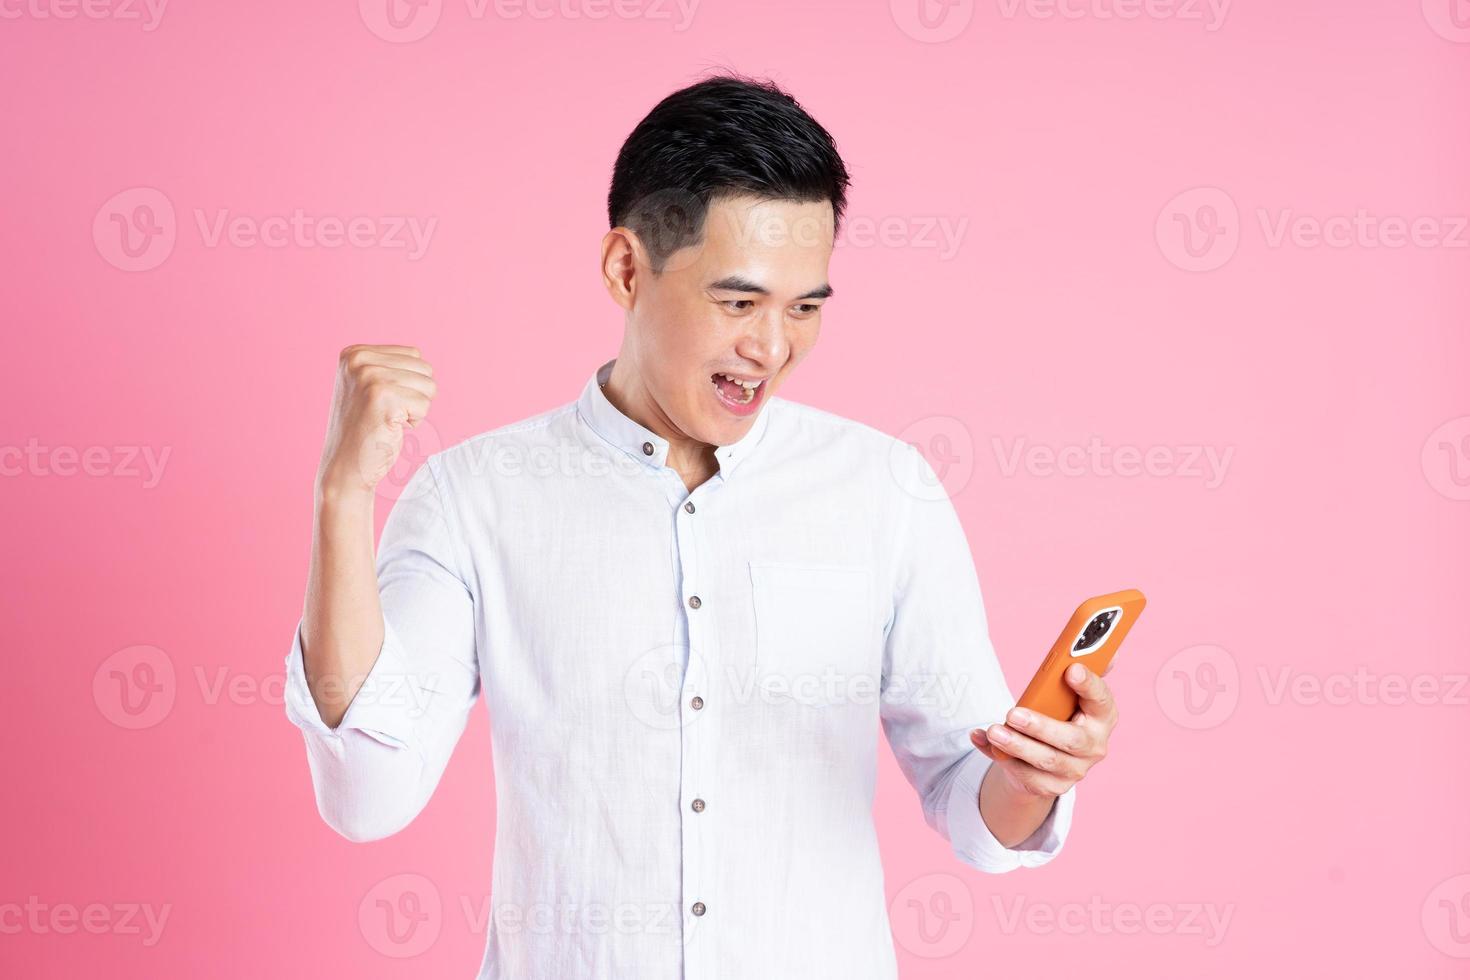 portrait of asian man posing on pink background photo